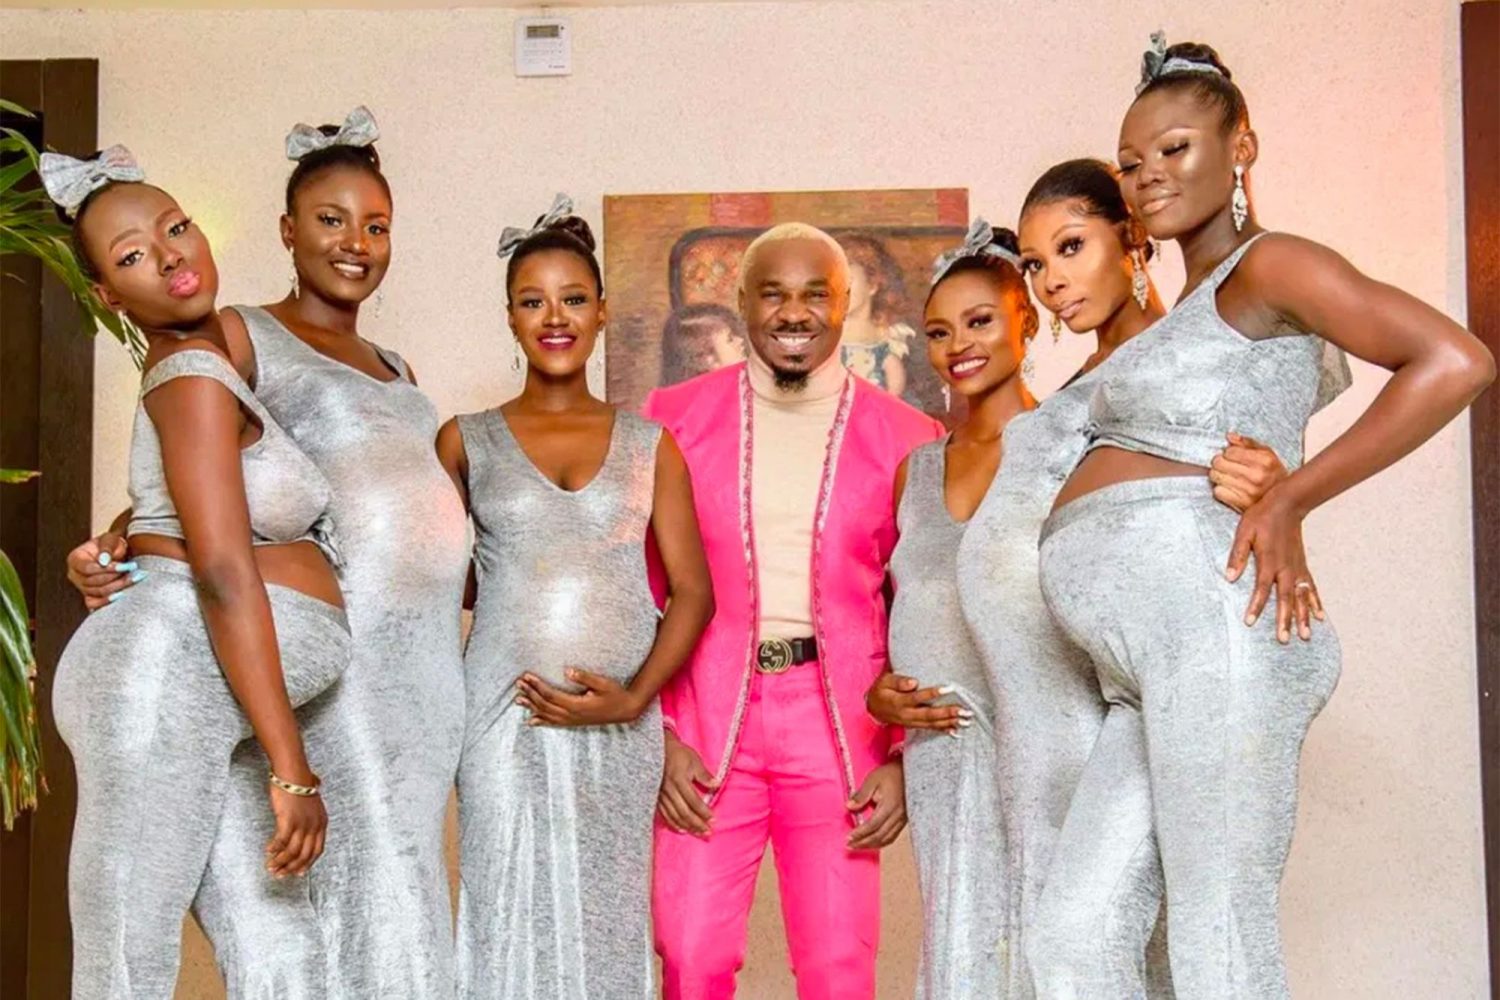 nigerian playboy claims six pregnant women are expecting his child